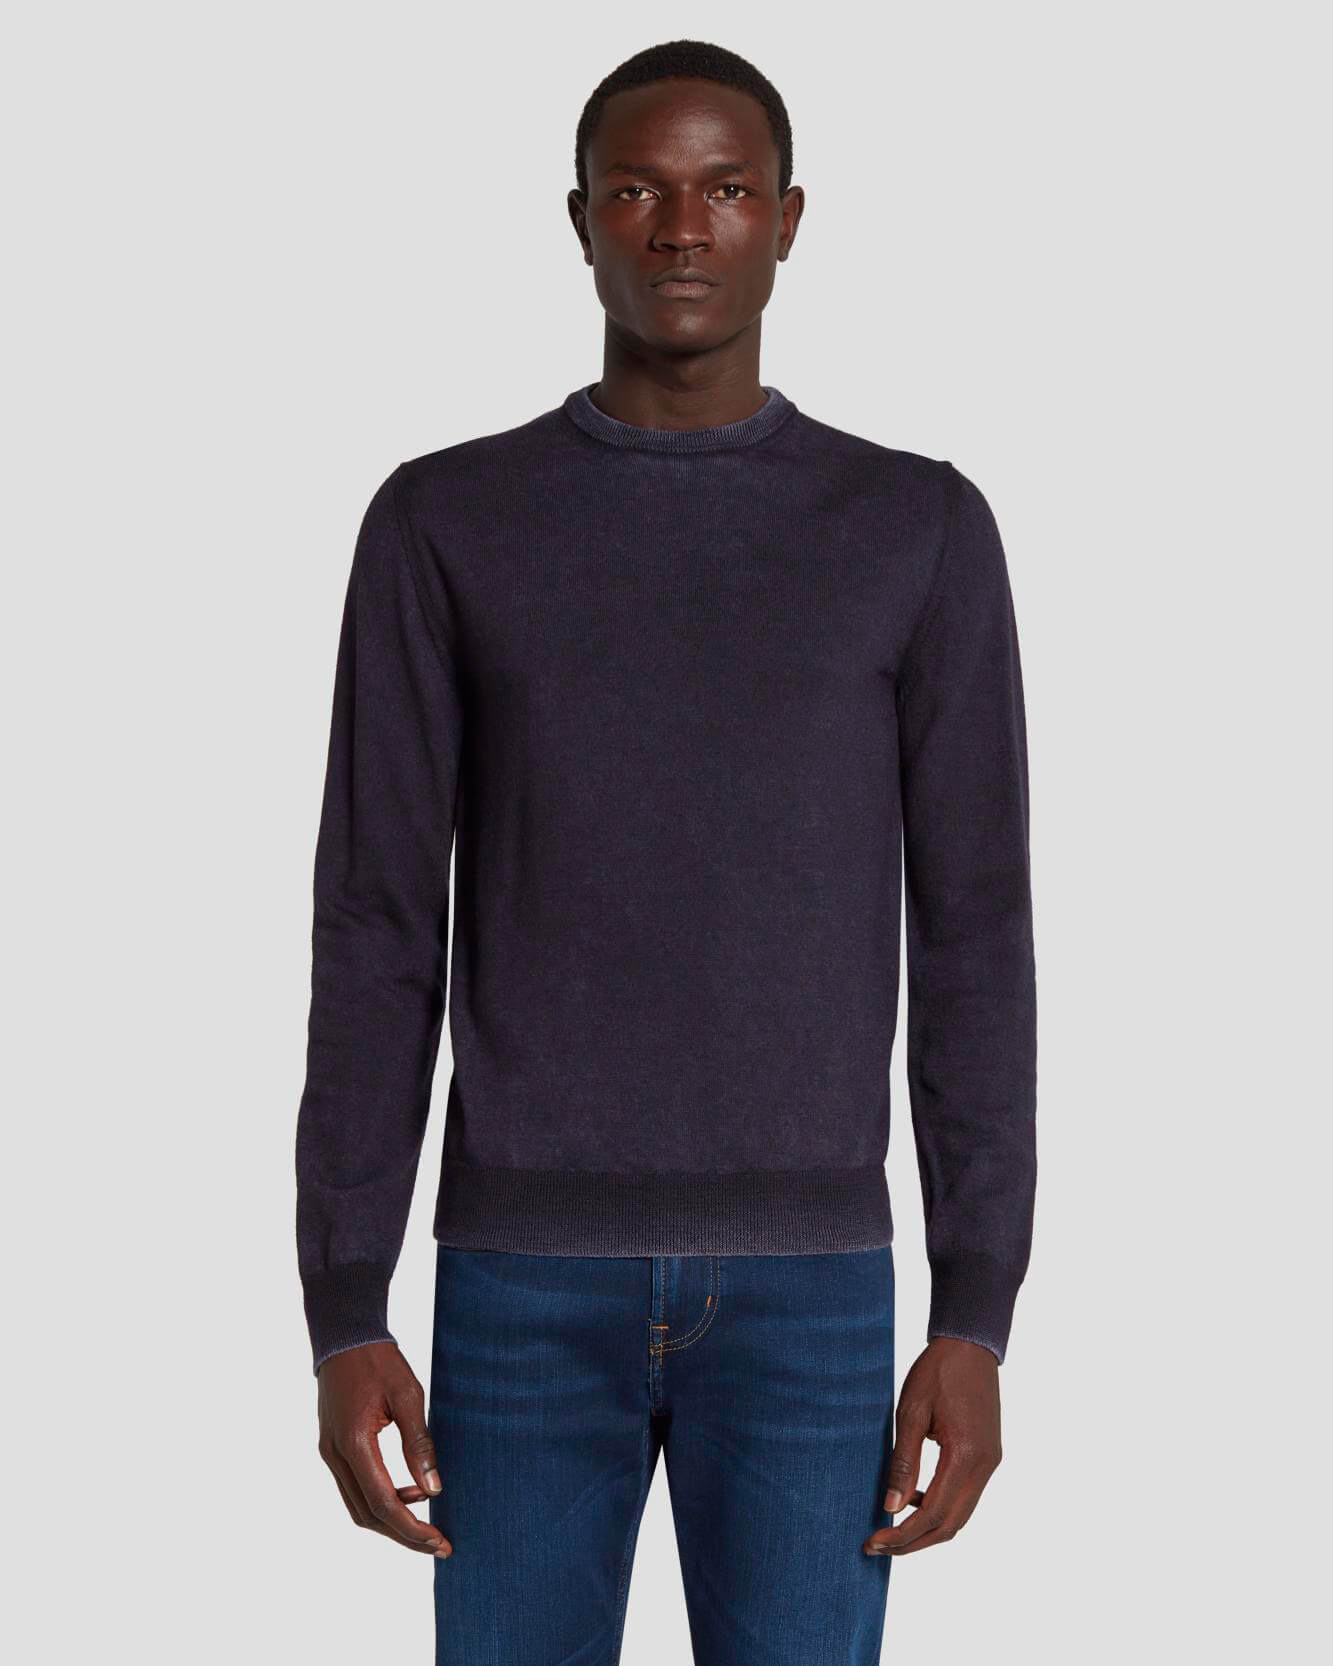 7 For All Mankind Merino Wool Sweater in Navy 7M001M16NVB